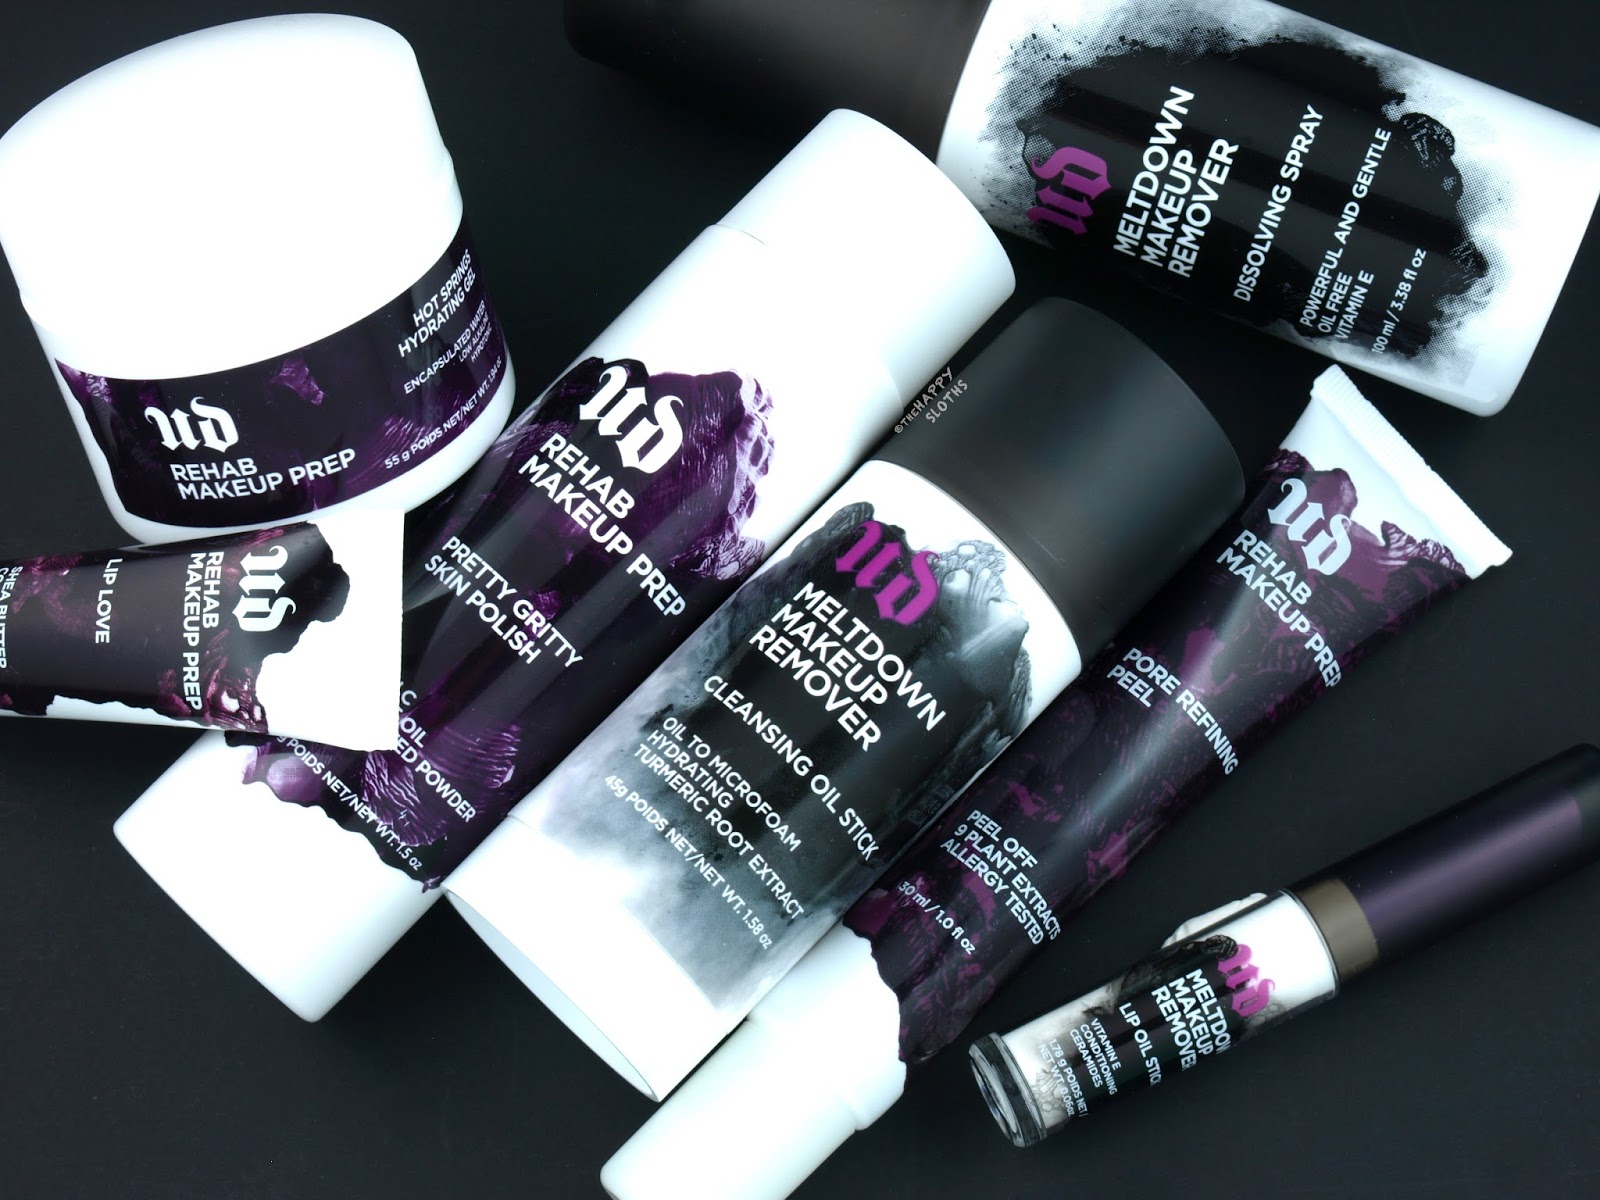 Urban Decay Meltdown Makeup Remover & Rehab Makeup Prep Skincare Collection: Review